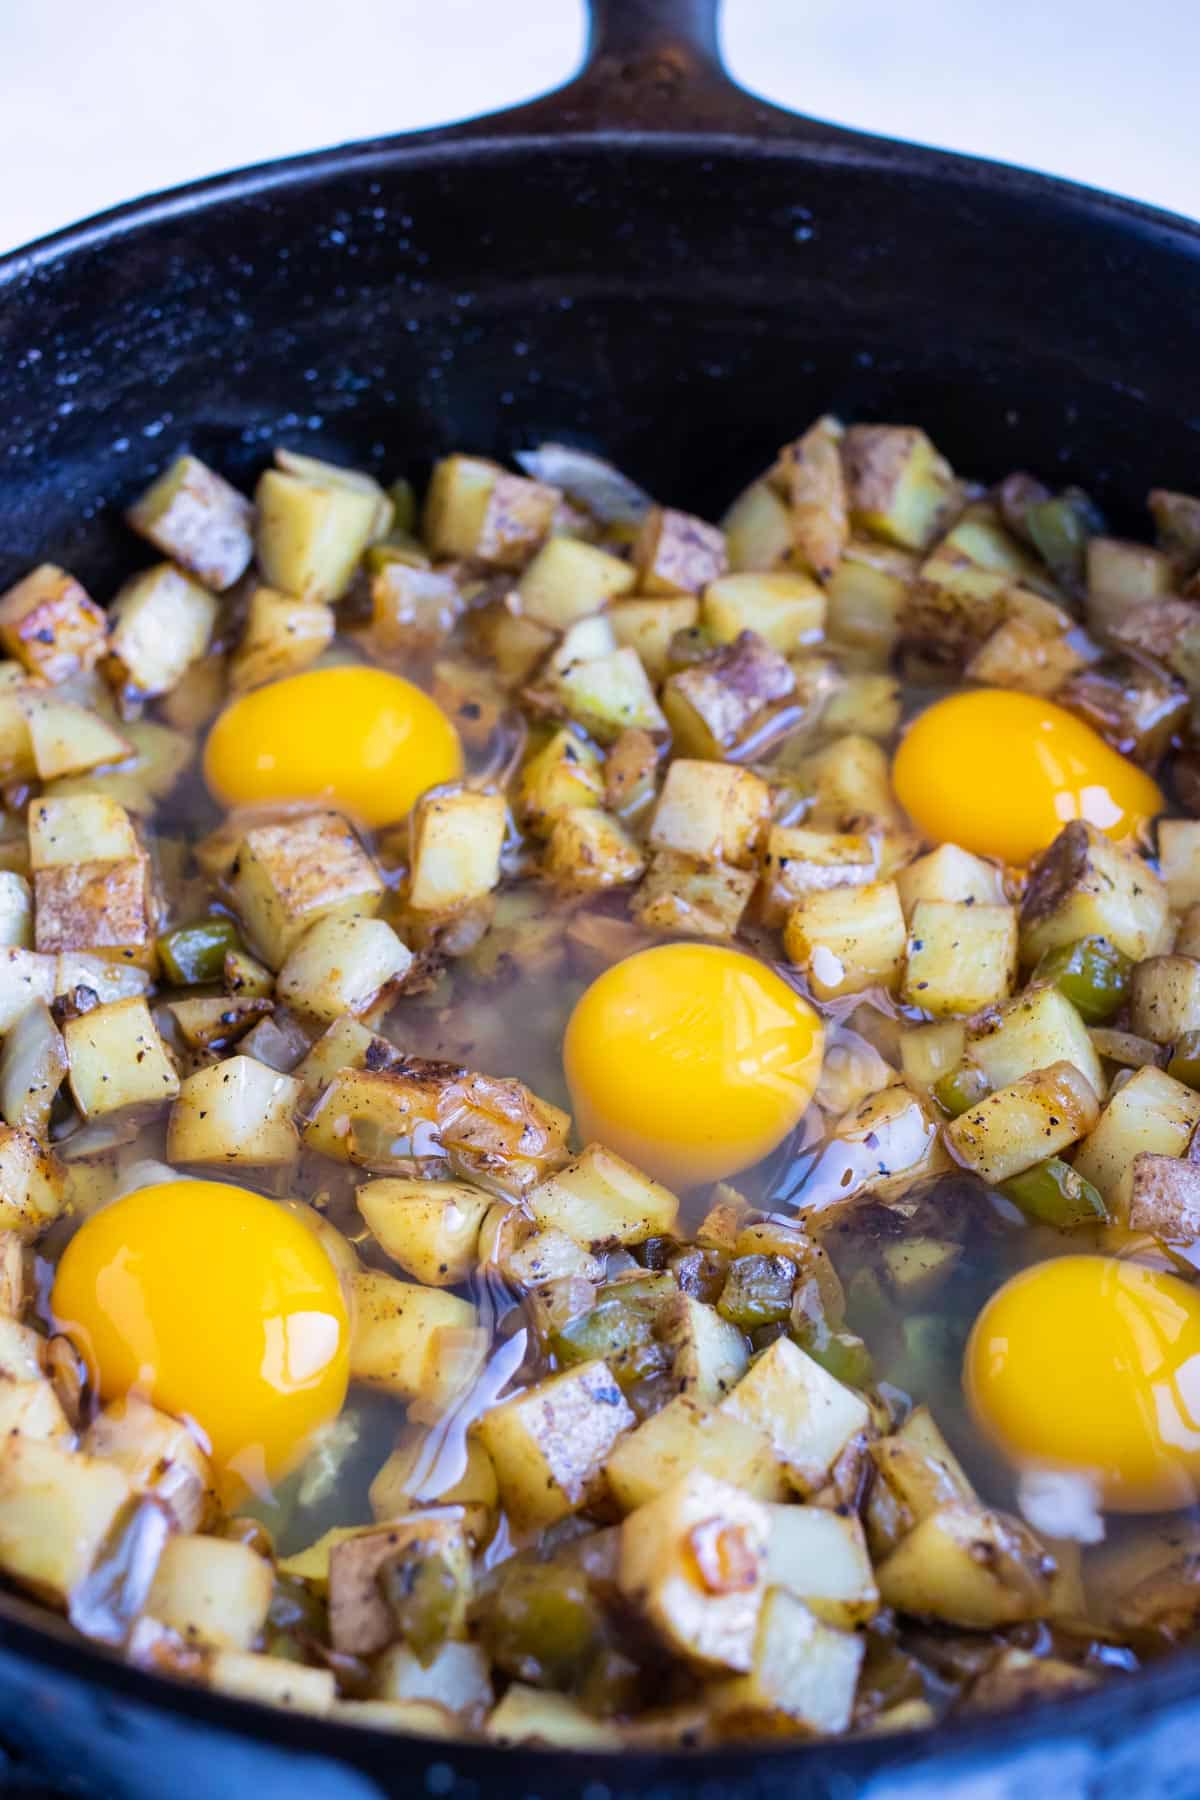 Eggs are added last to the skillet and cooked.